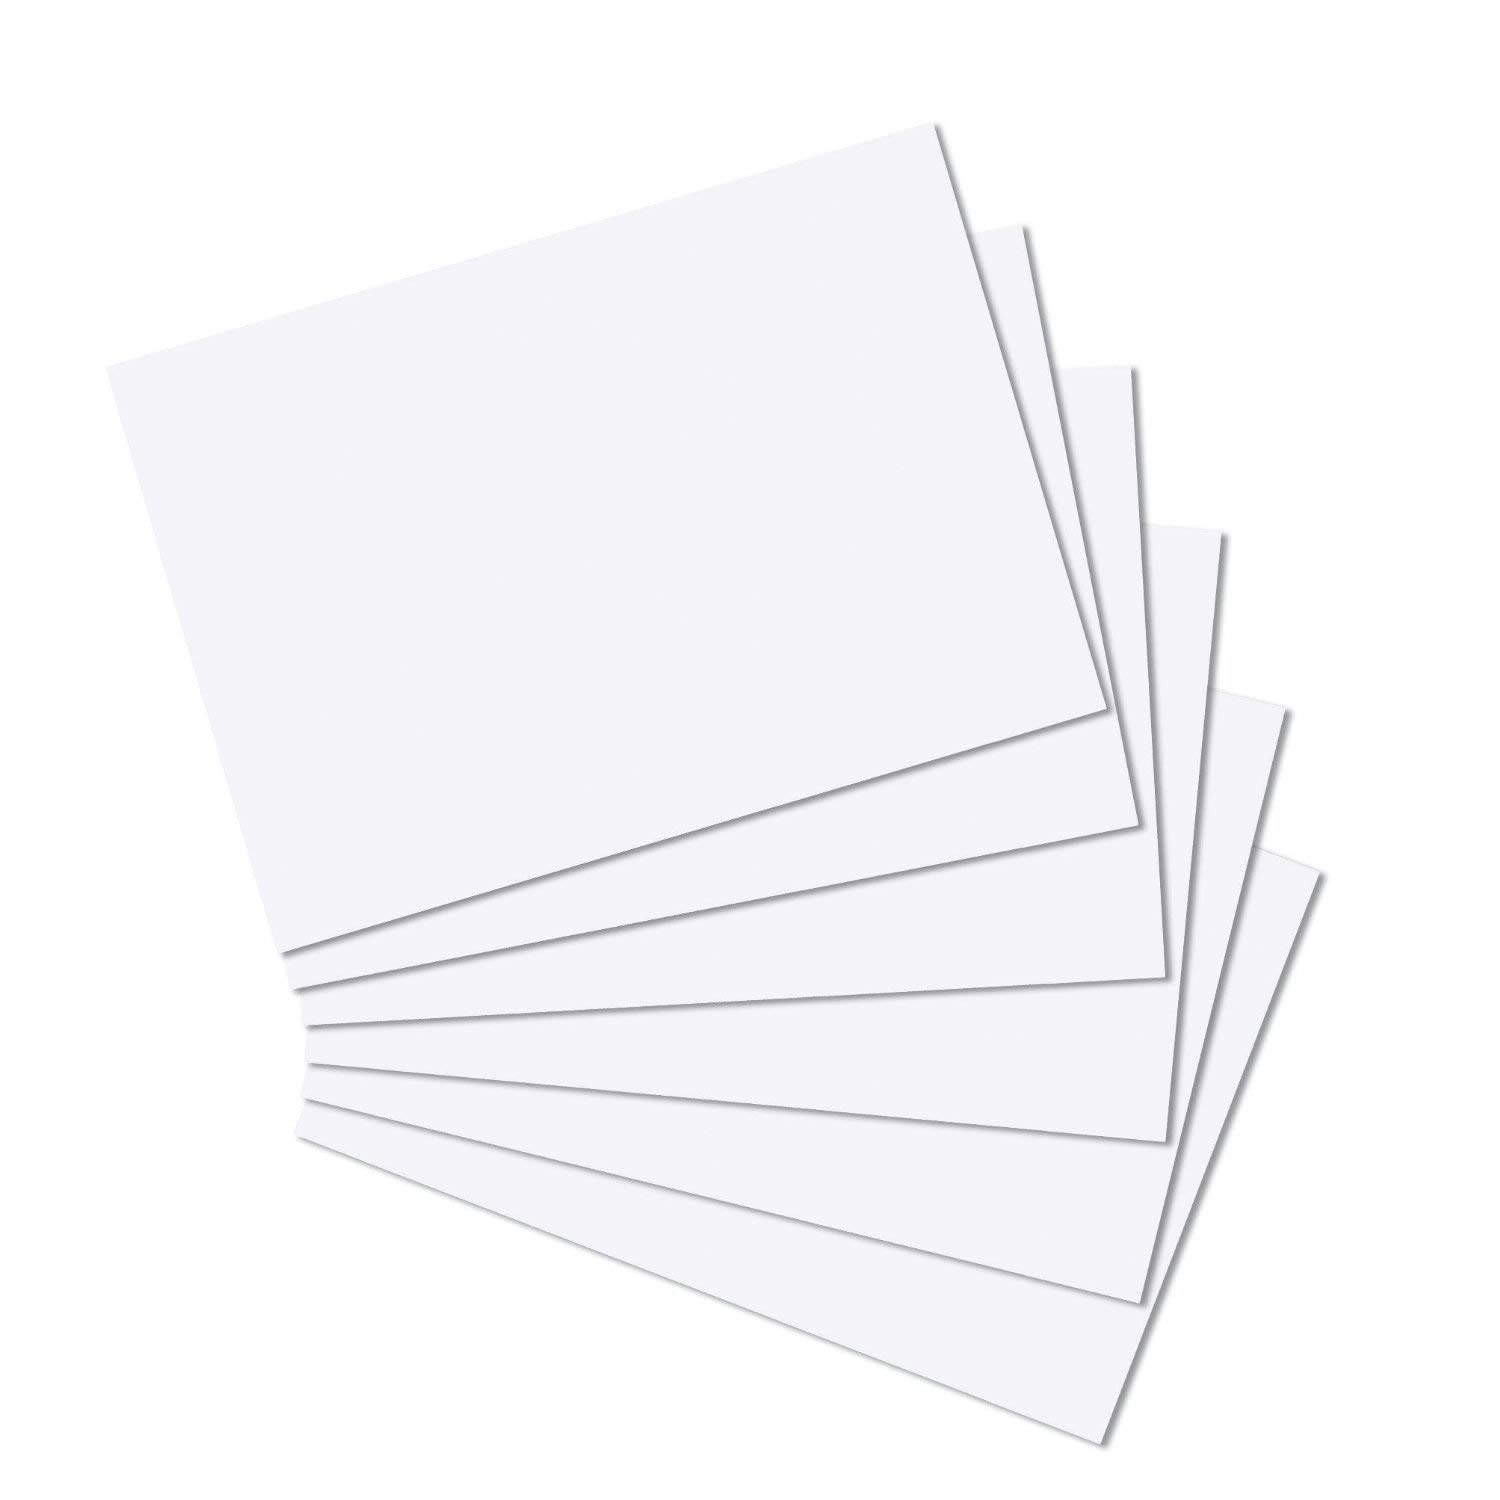 A6 White Card Postcard Size Blank Card Crafting Thick Card 50 sheets 300gsm 